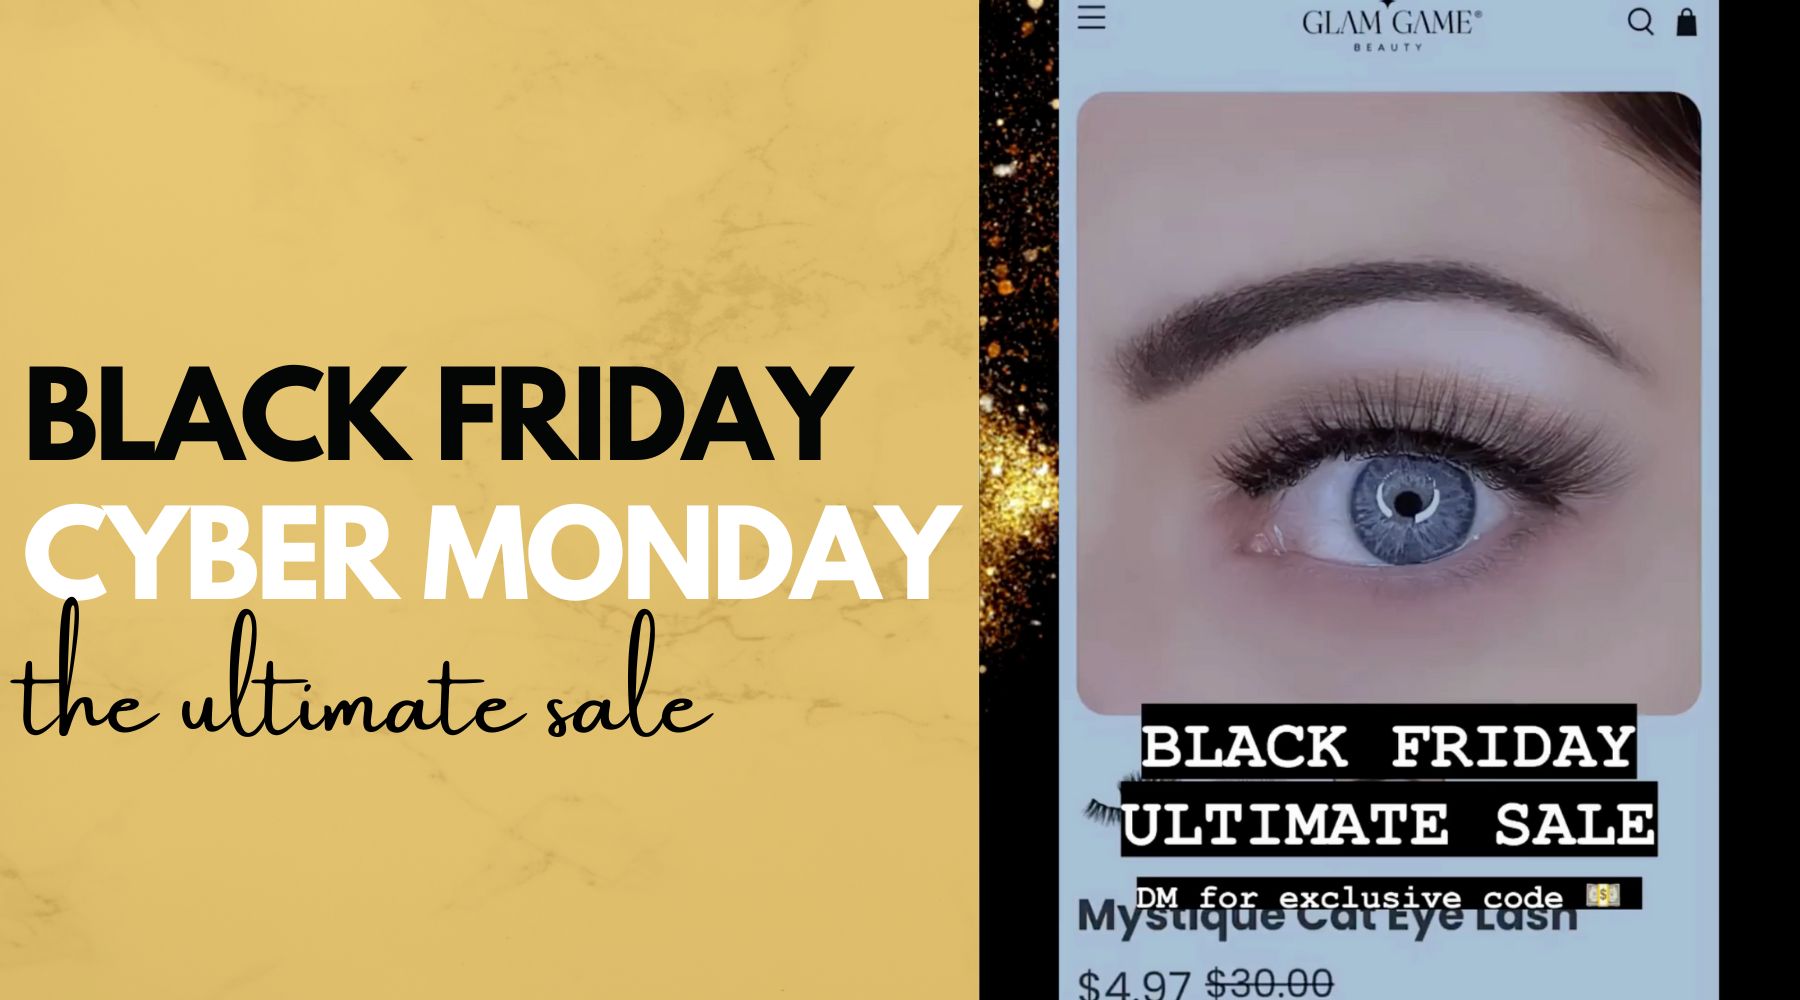 Glam Game Beauty's Black Friday & Cyber Monday Ultimate Makeup Deals!